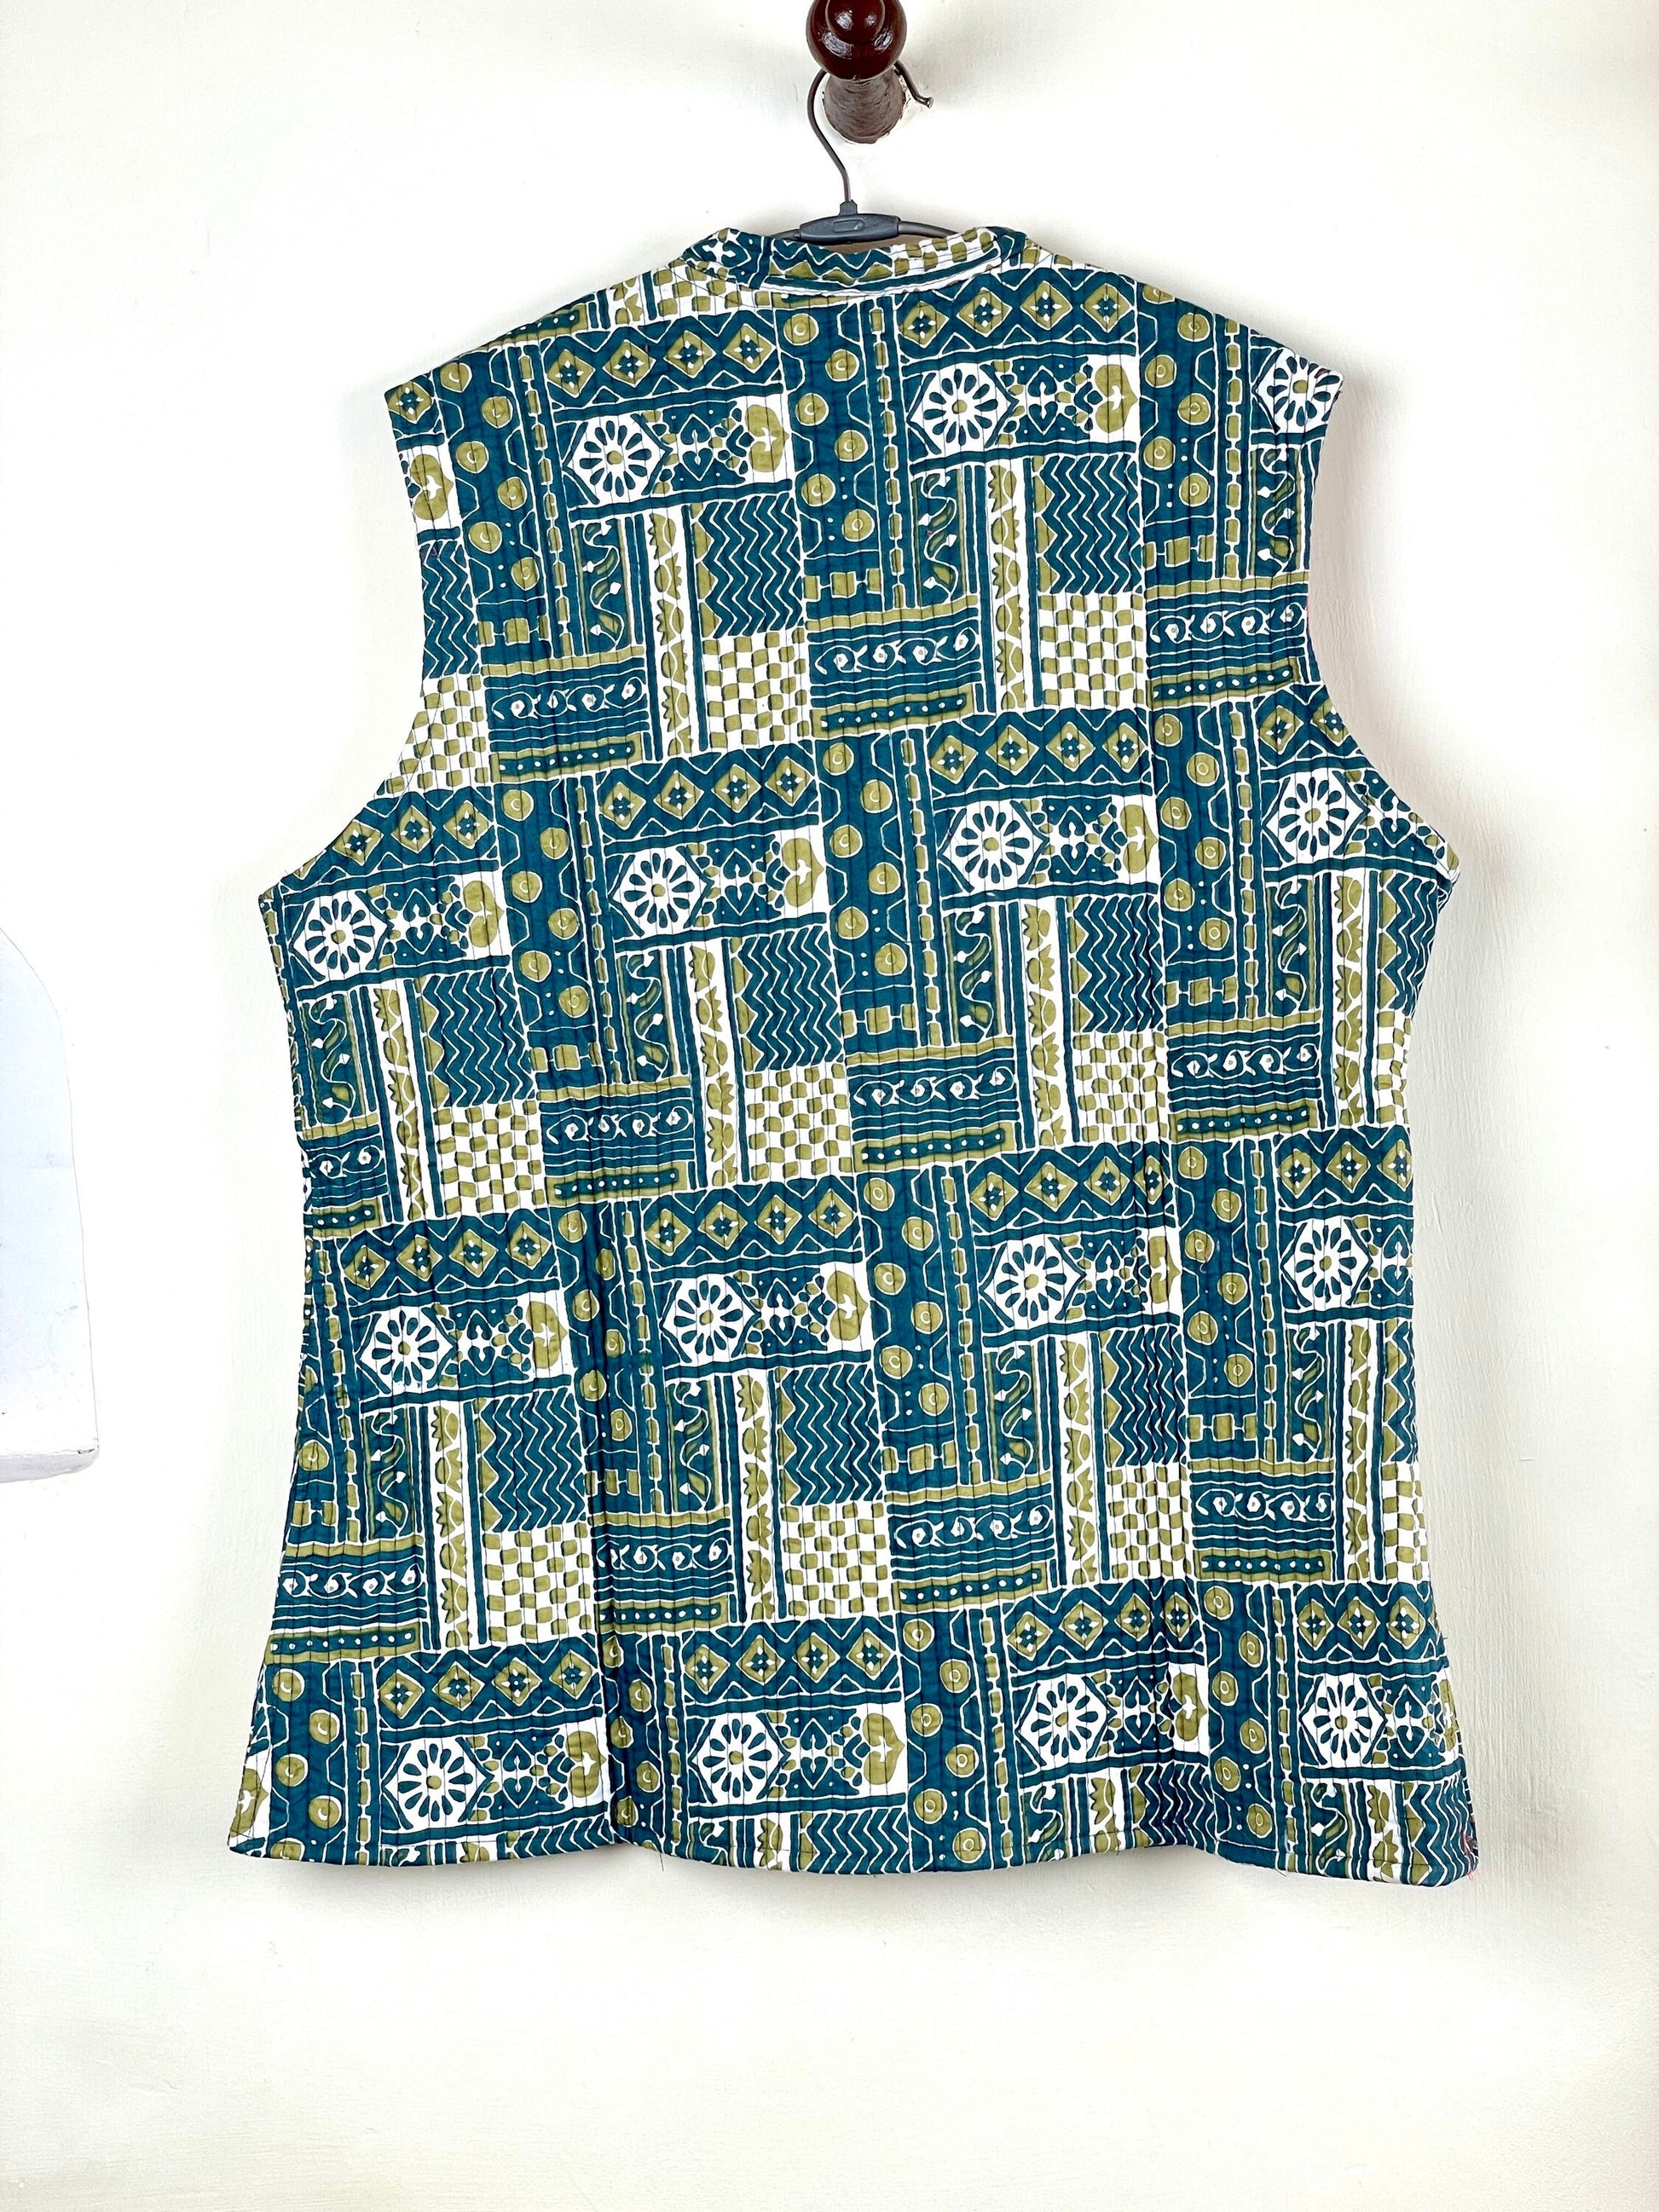 Indian Handmade Quilted Cotton Sleeveless Jacket Blue & Green Stylish Women's Vest, Reversible Waistcoat for Her